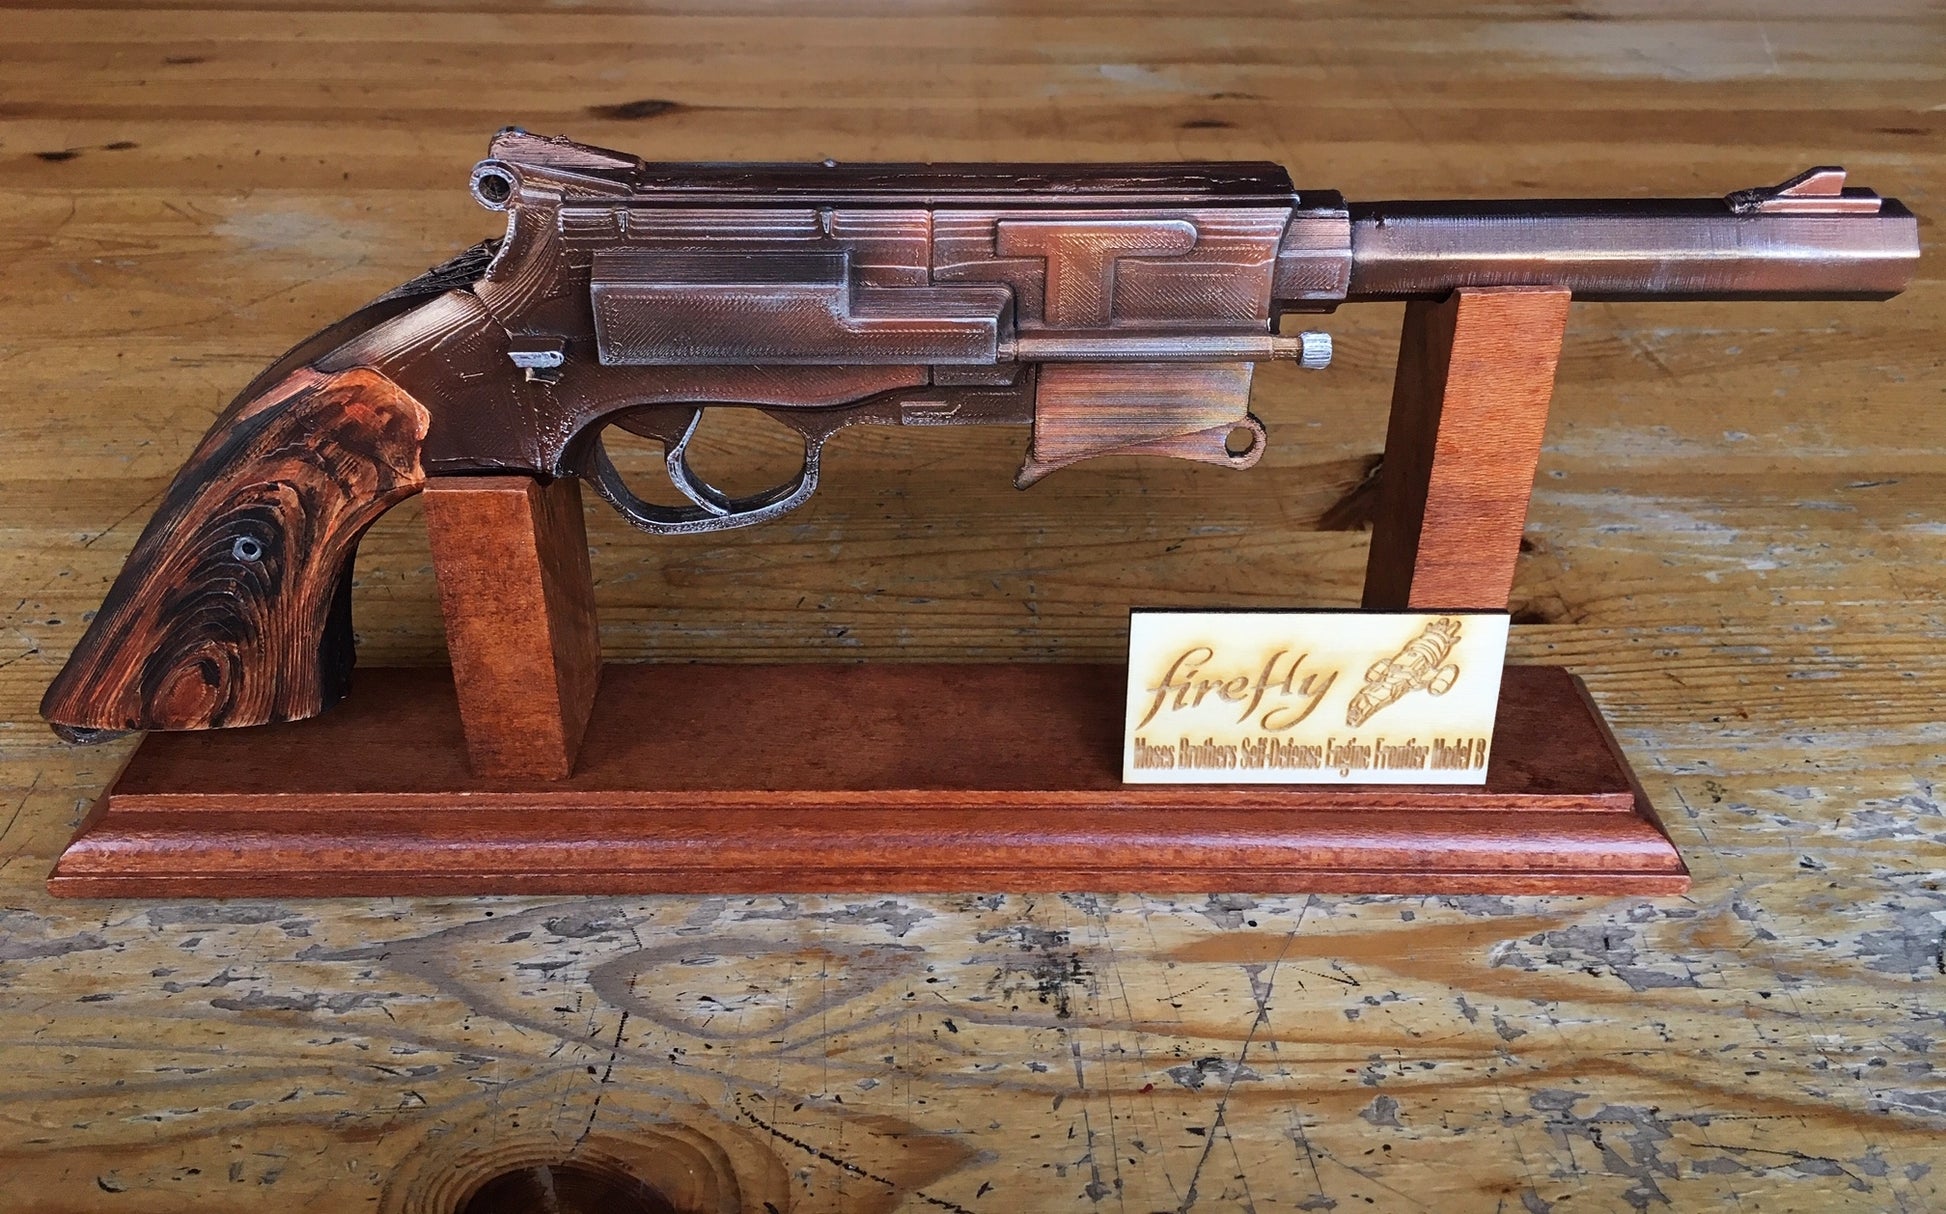 Firefly Serenity Captain Malcolm Reynold's Gun, cosplay prop - Geek House Creations